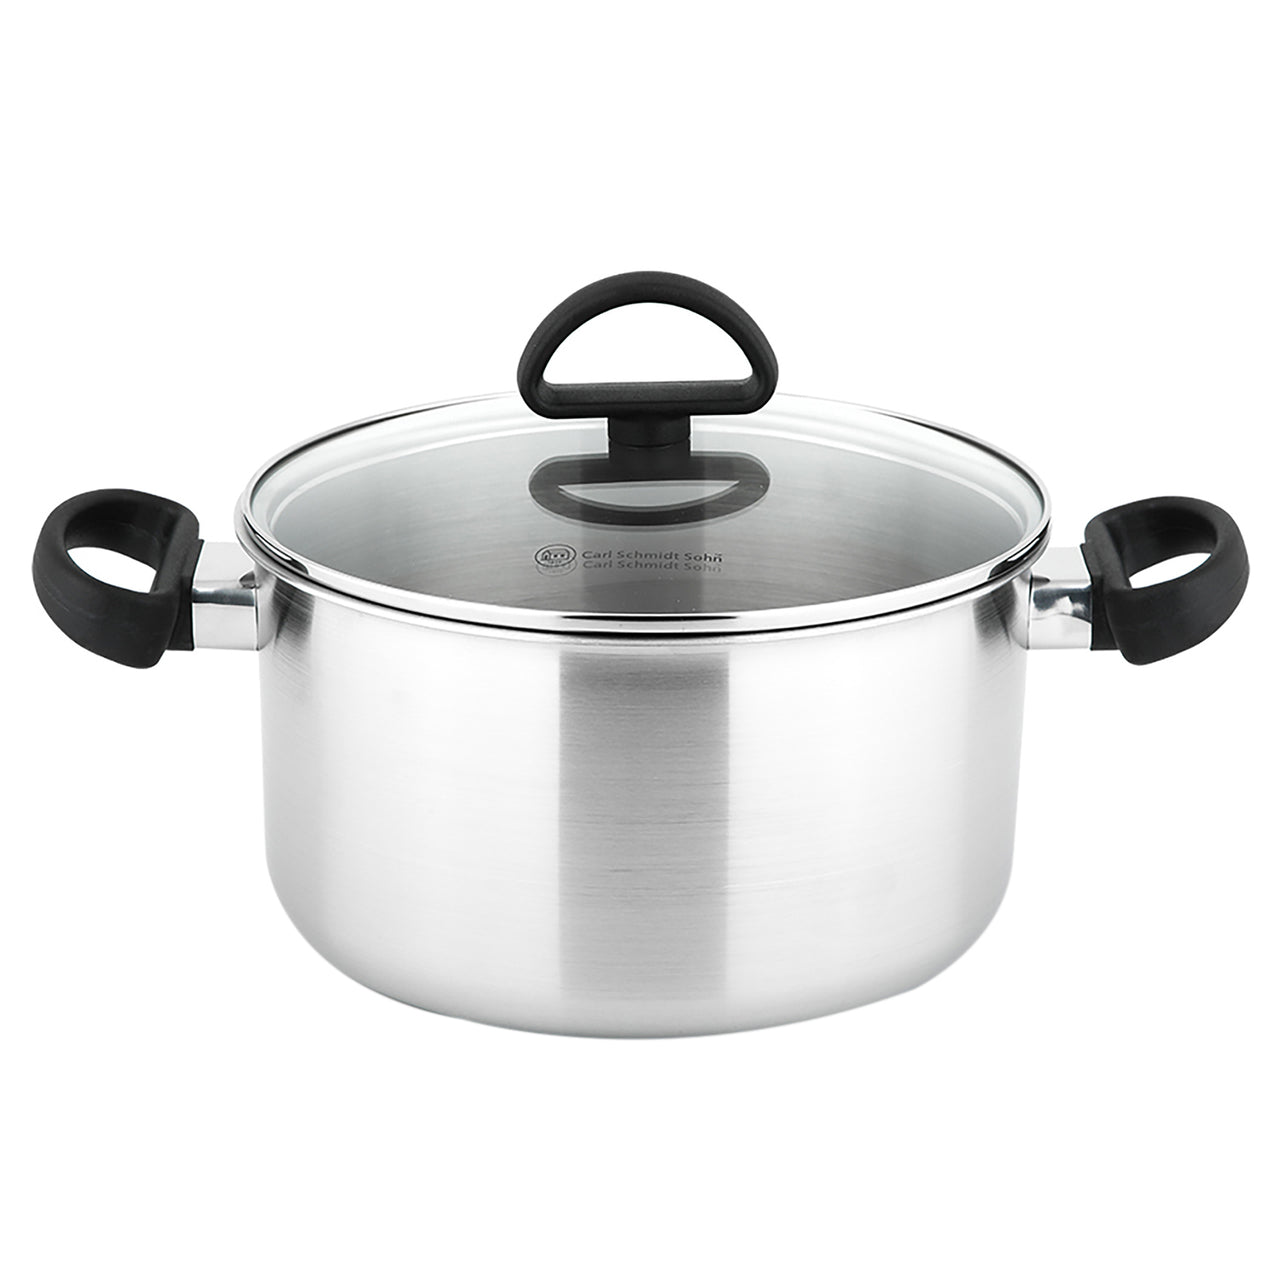 Silver Riesa 5L Stainless Steel Casserole with Glass Lid